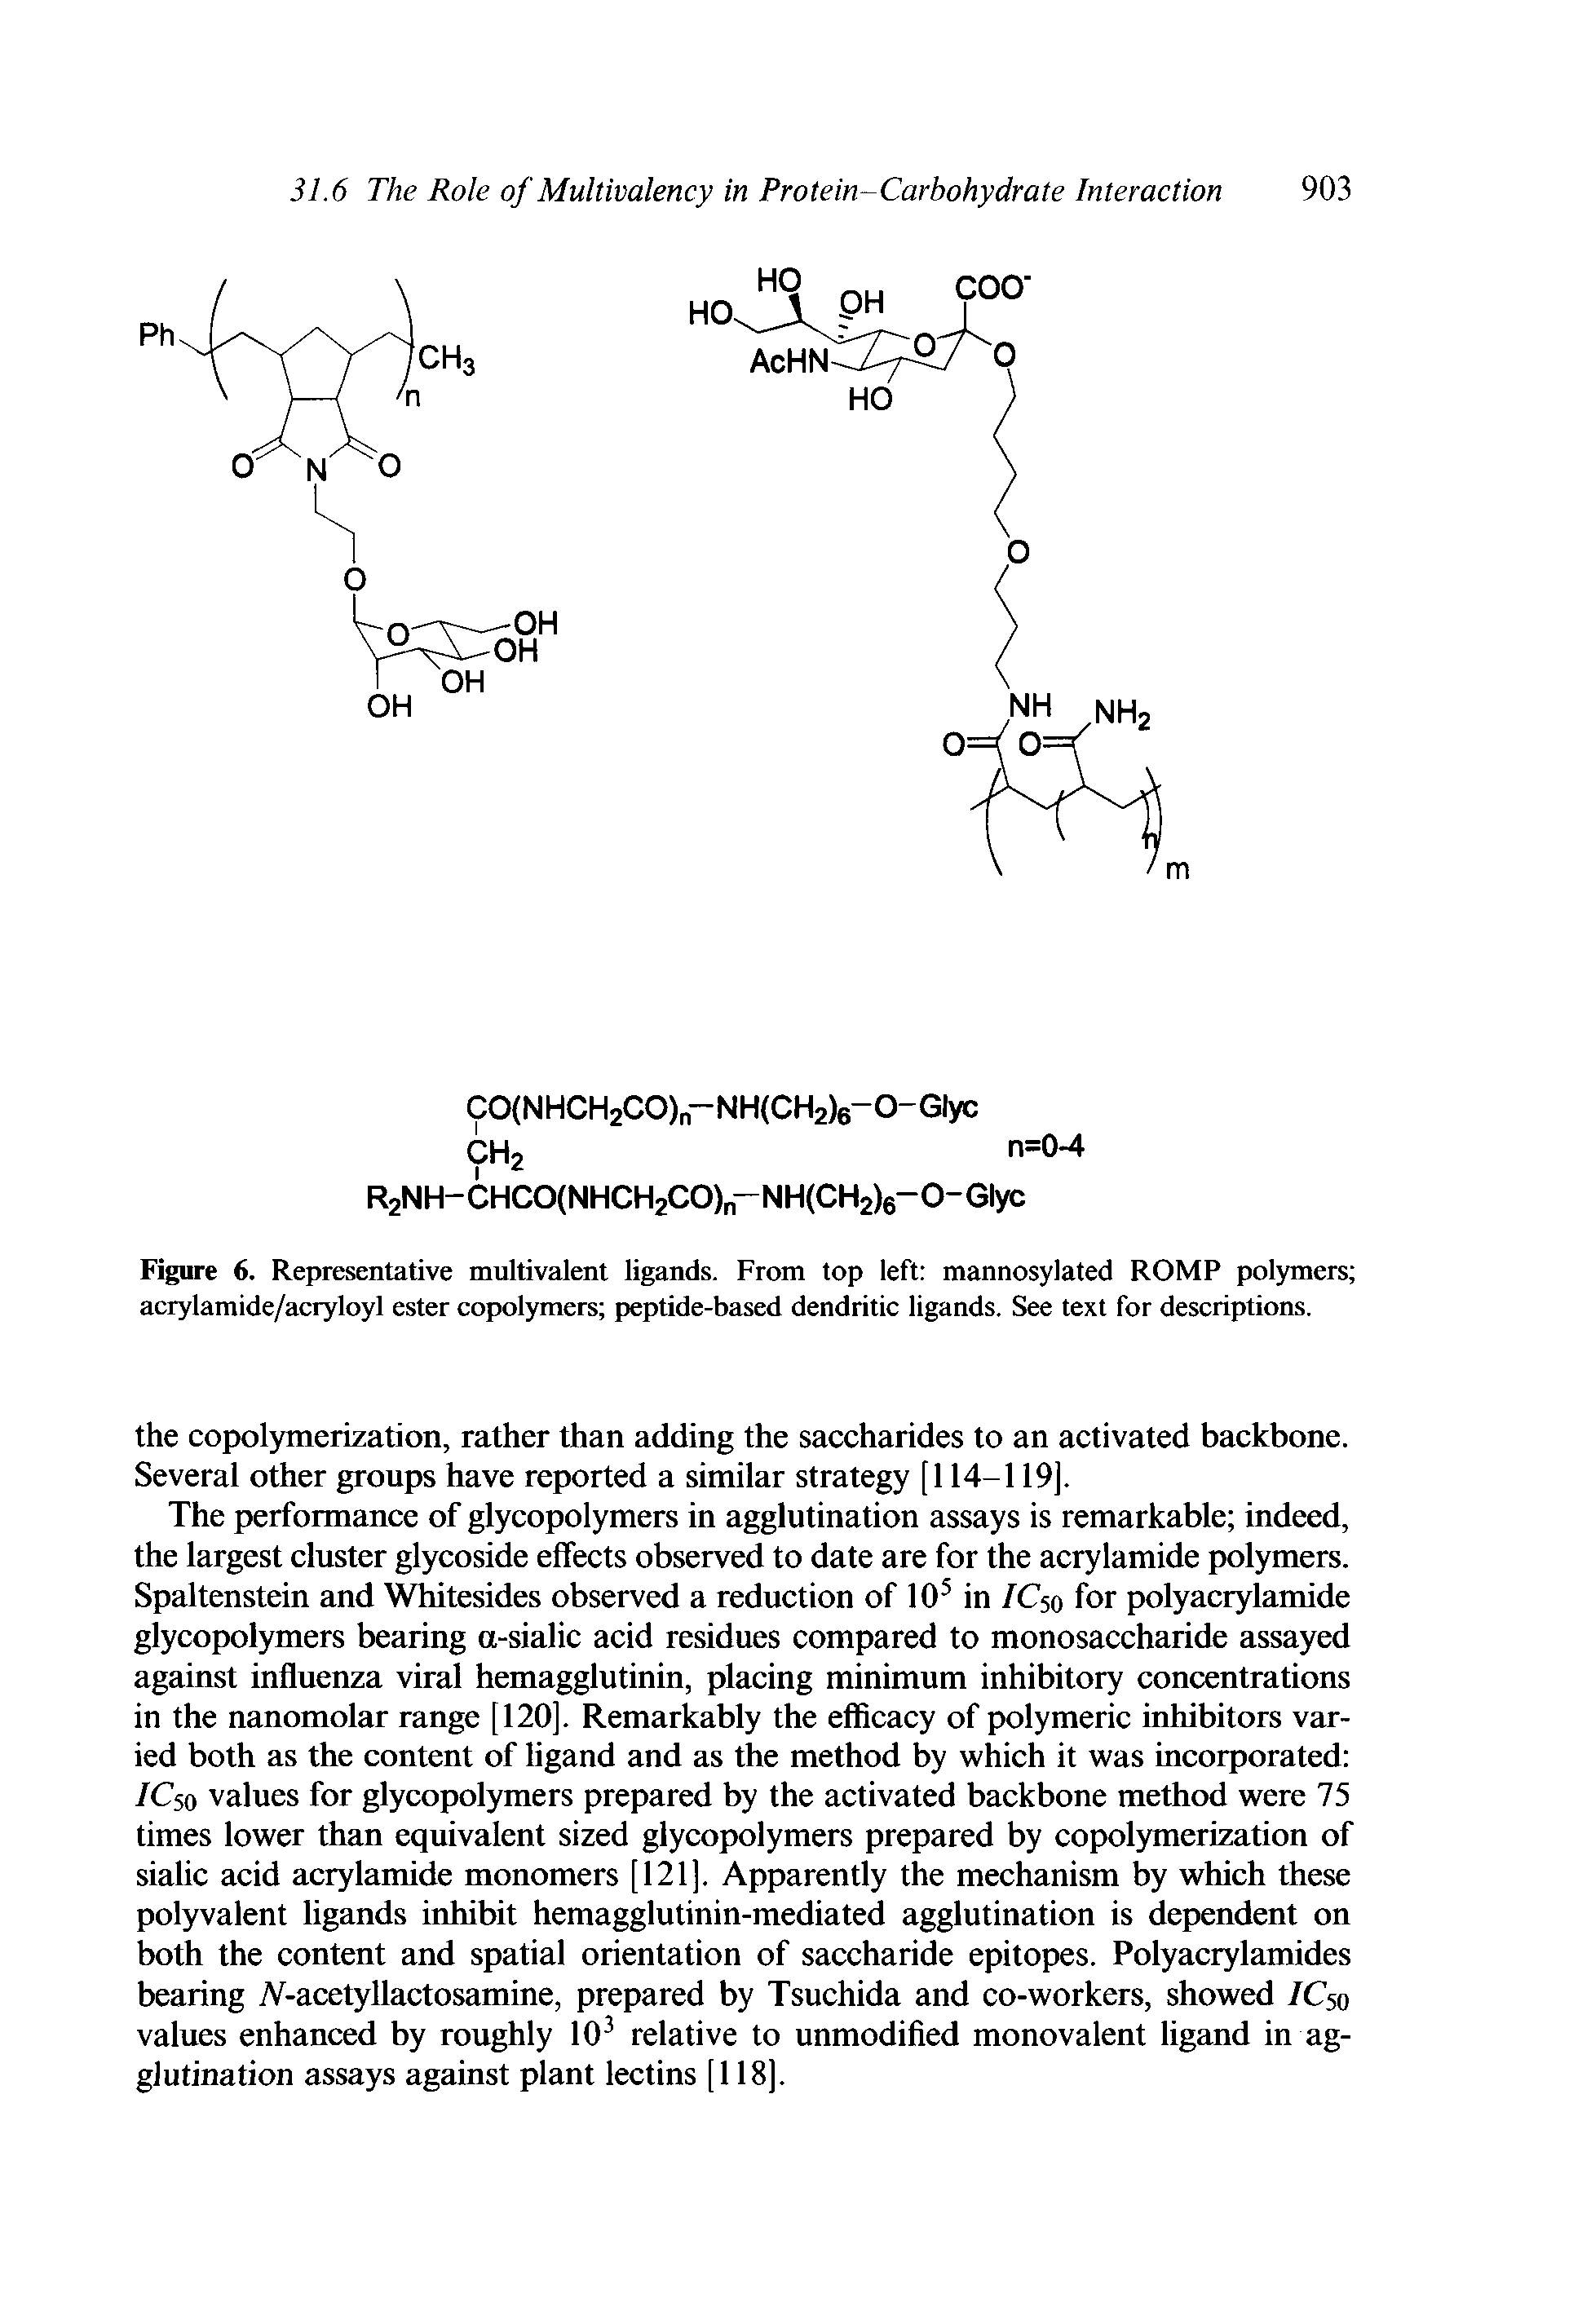 Figure 6. Representative multivalent ligands. From top left mannosylated ROMP polymers acrylamide/acryloyl ester copolymers peptide-based dendritic ligands. See text for descriptions.